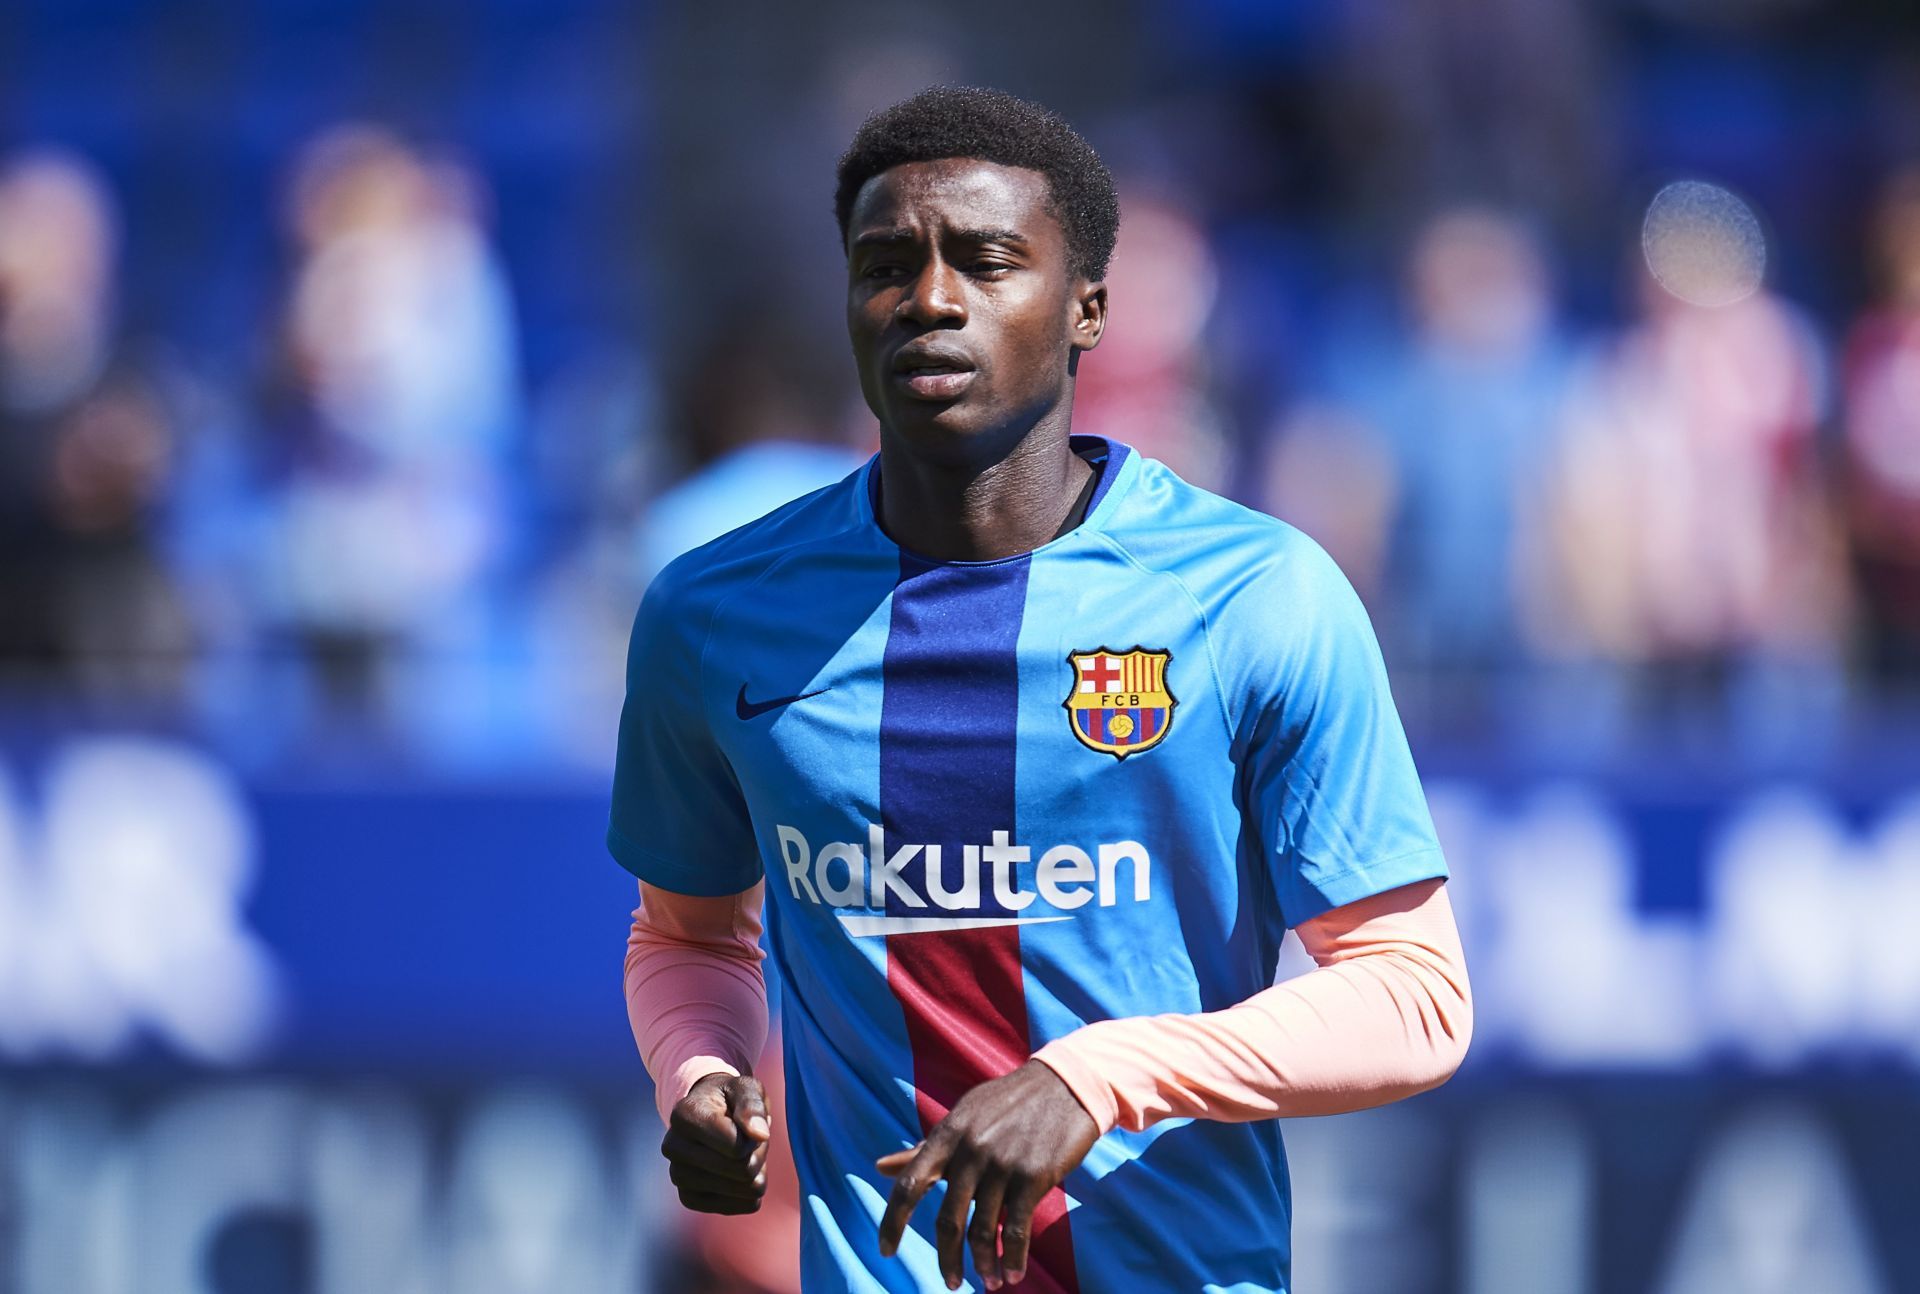 Moussa Wague signed for Barcelona in 2018